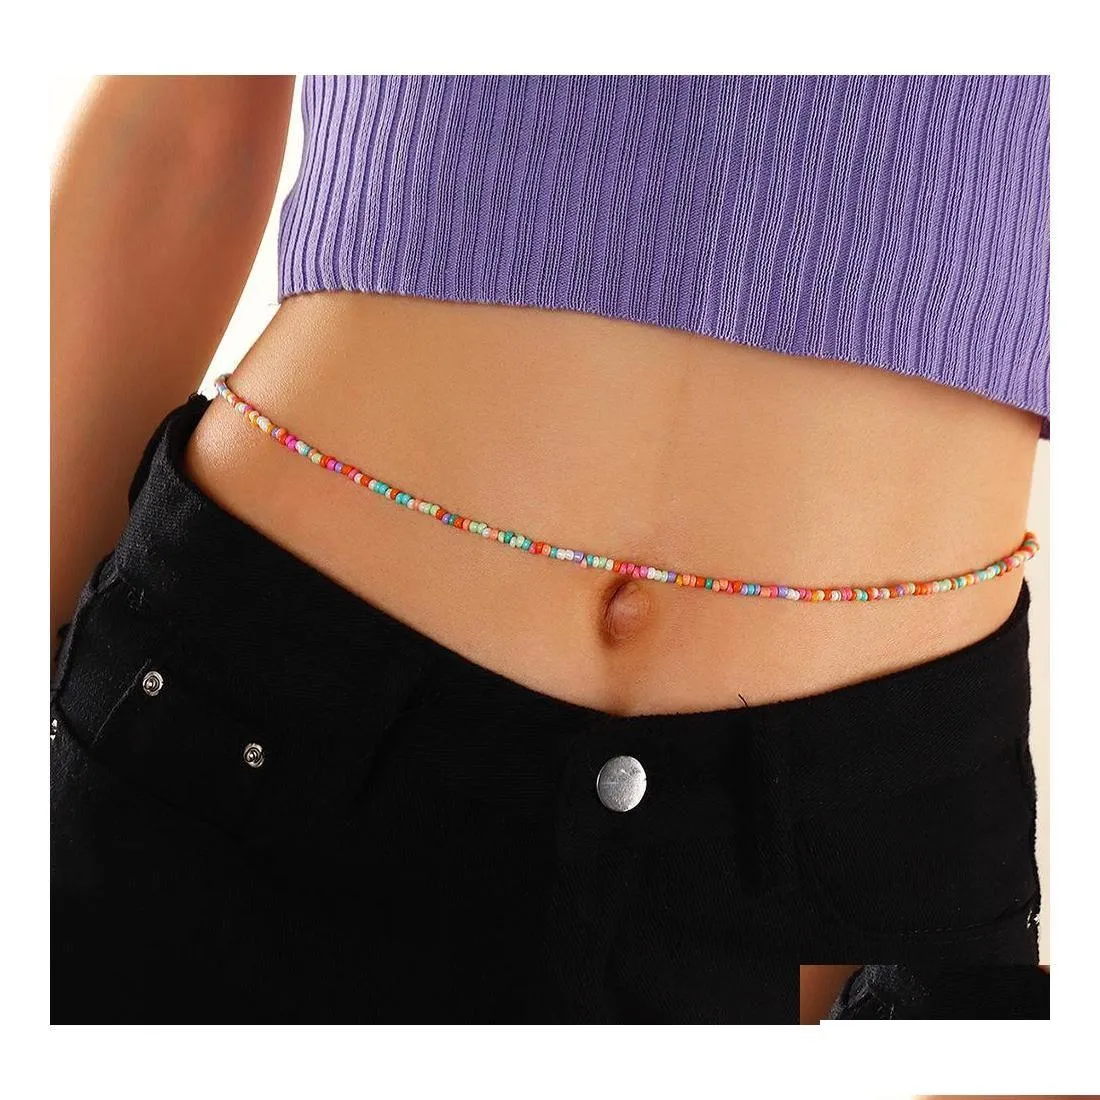 Belly Chains Bohemian Fashion Jewelry Handmade Colorf Chain Bikini Beads Belt Beaded Thin Body Waist Drop Delivery Dhzyb Dhl51